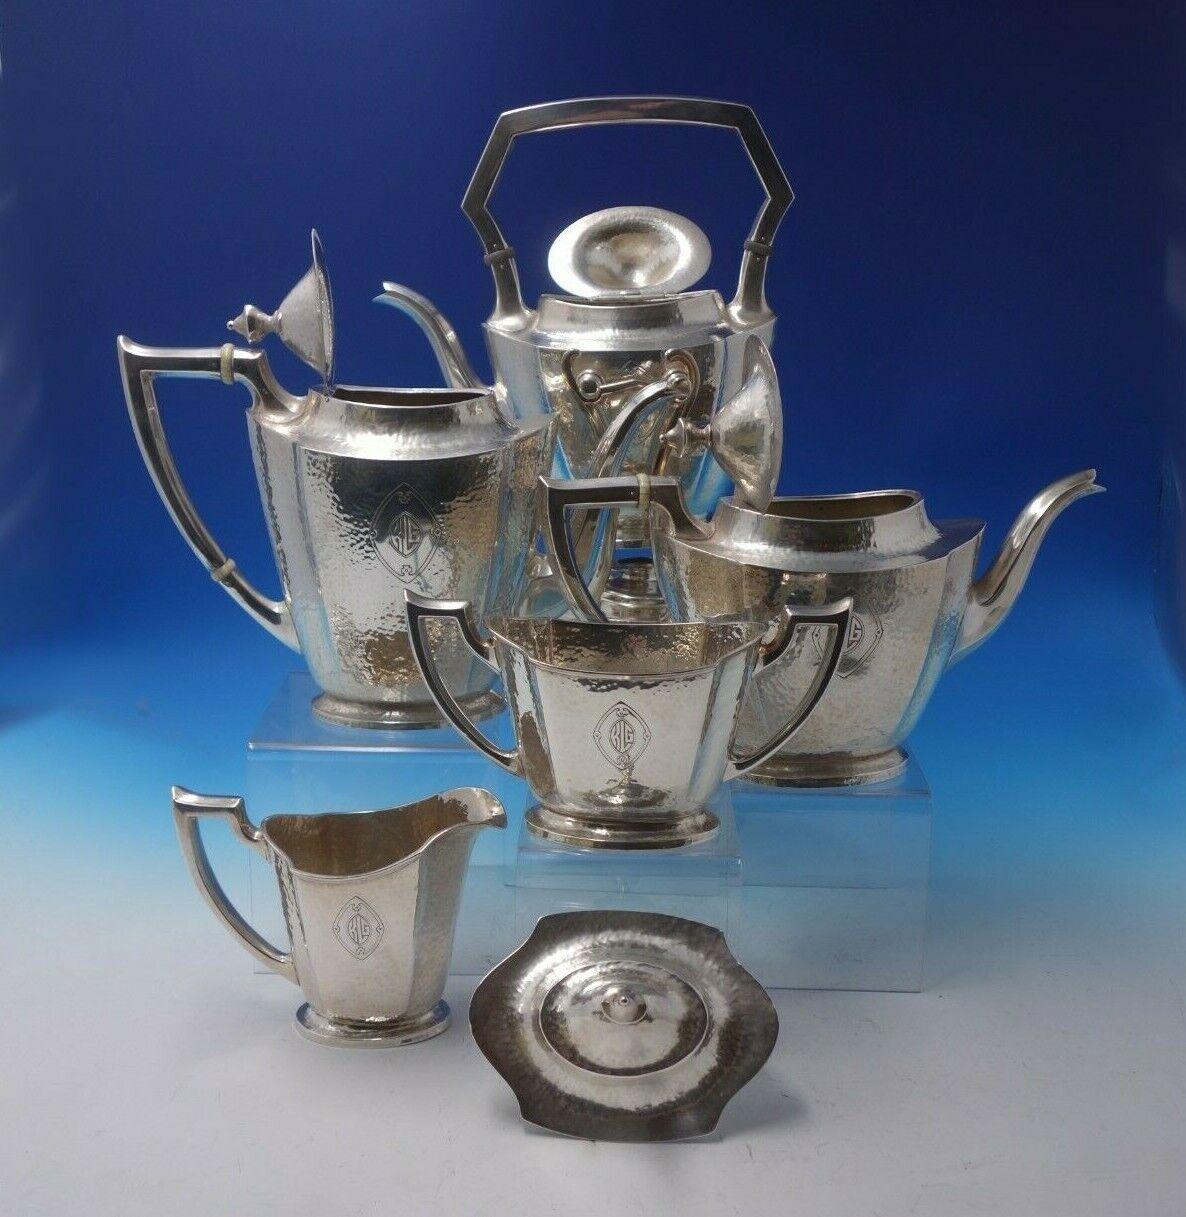 Martel by International

Remarkable Martel by International sterling silver 5-piece tea set. This set includes:

1 - Kettle on Stand: Marked #306H1, holds 2 1/2 pints, measures 13